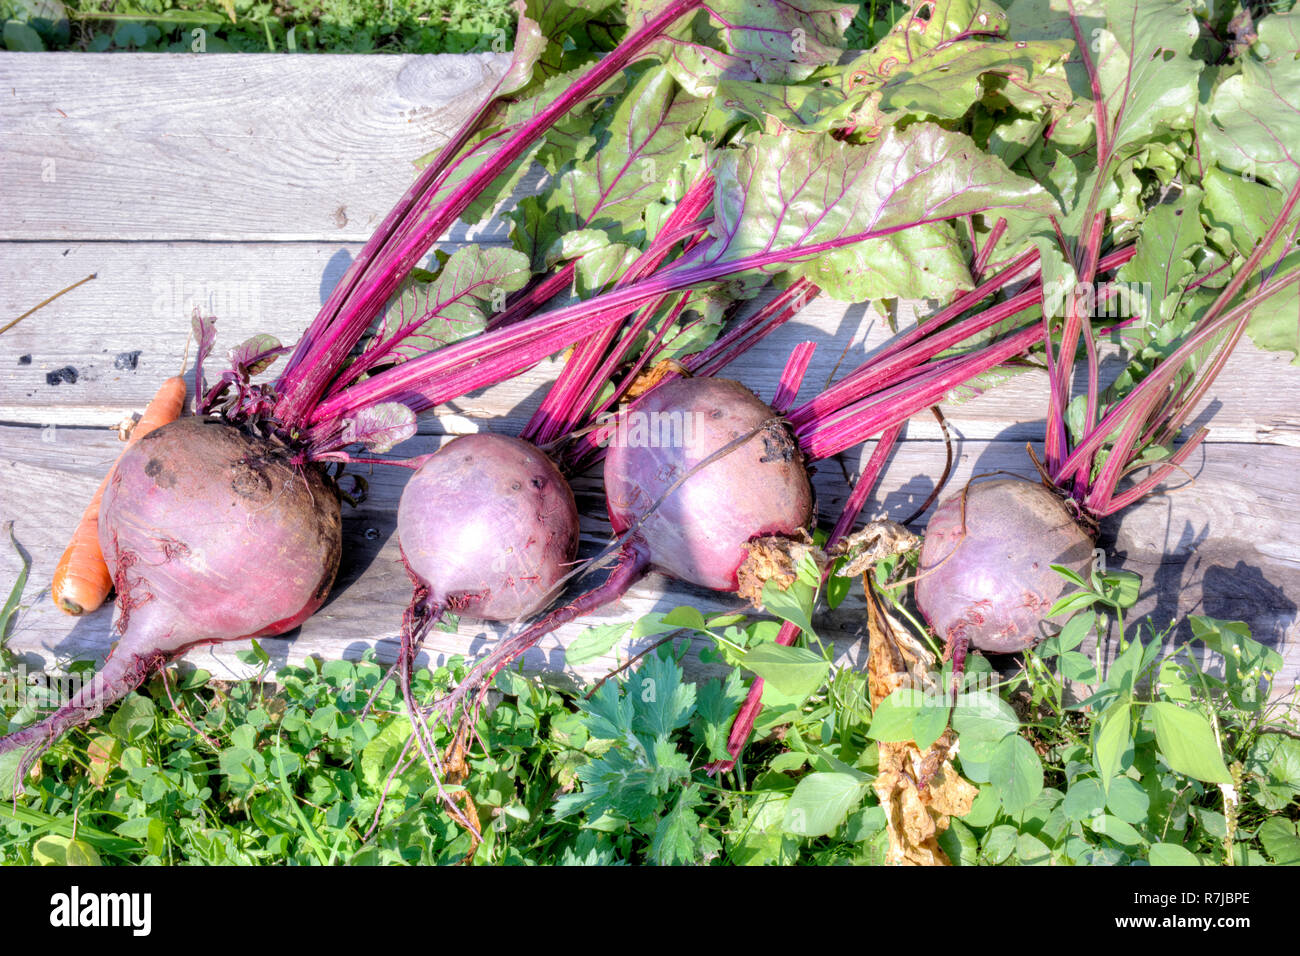 Mature beetroot lies on the garden bed Stock Photo